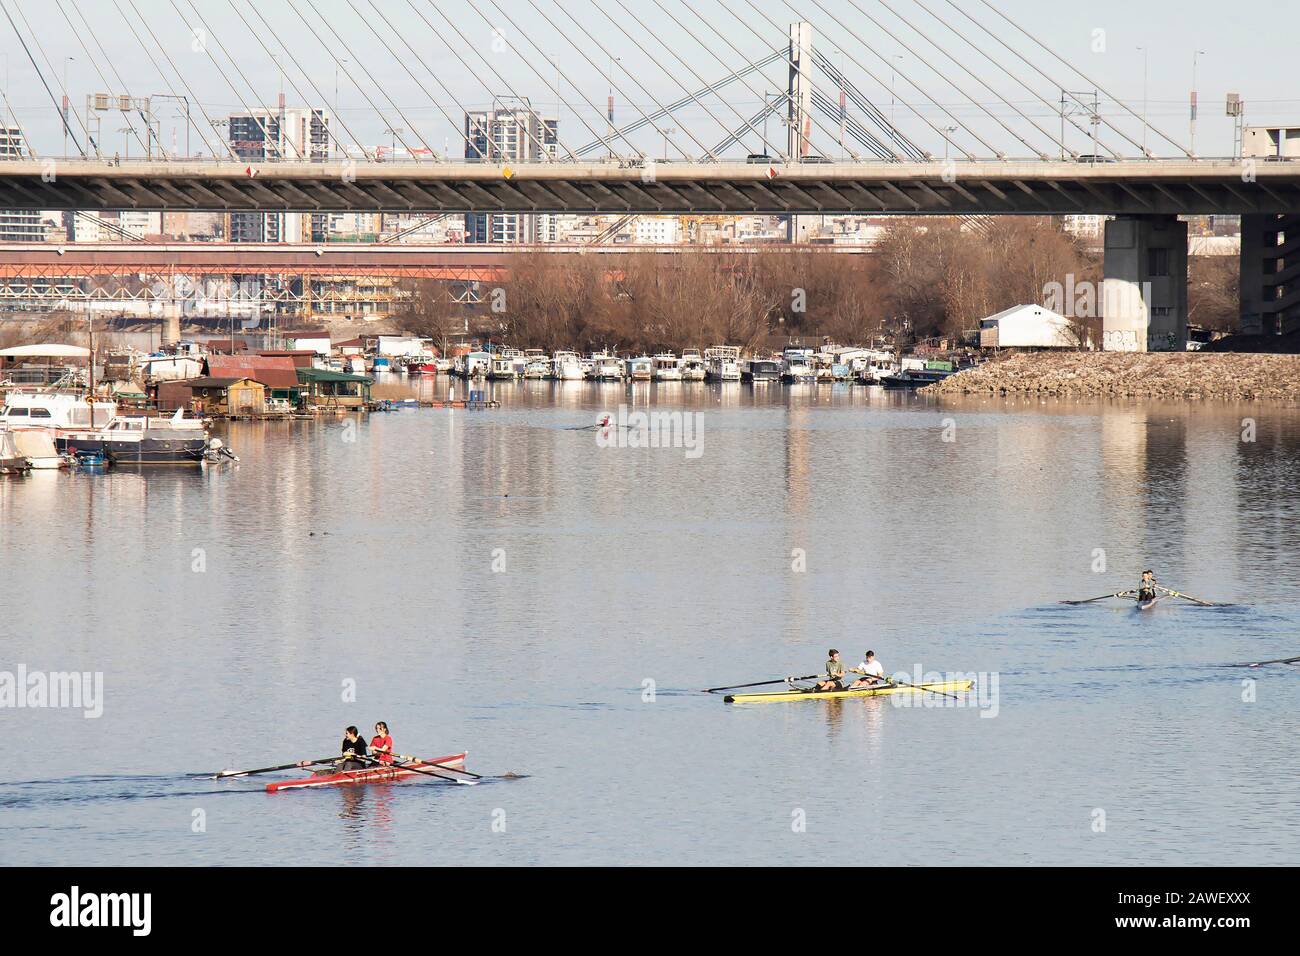 Belgrade, Serbia - February 2, 2020: Young people rowing in Sava river armlet, under city bridges, on a sunny winter day Stock Photo